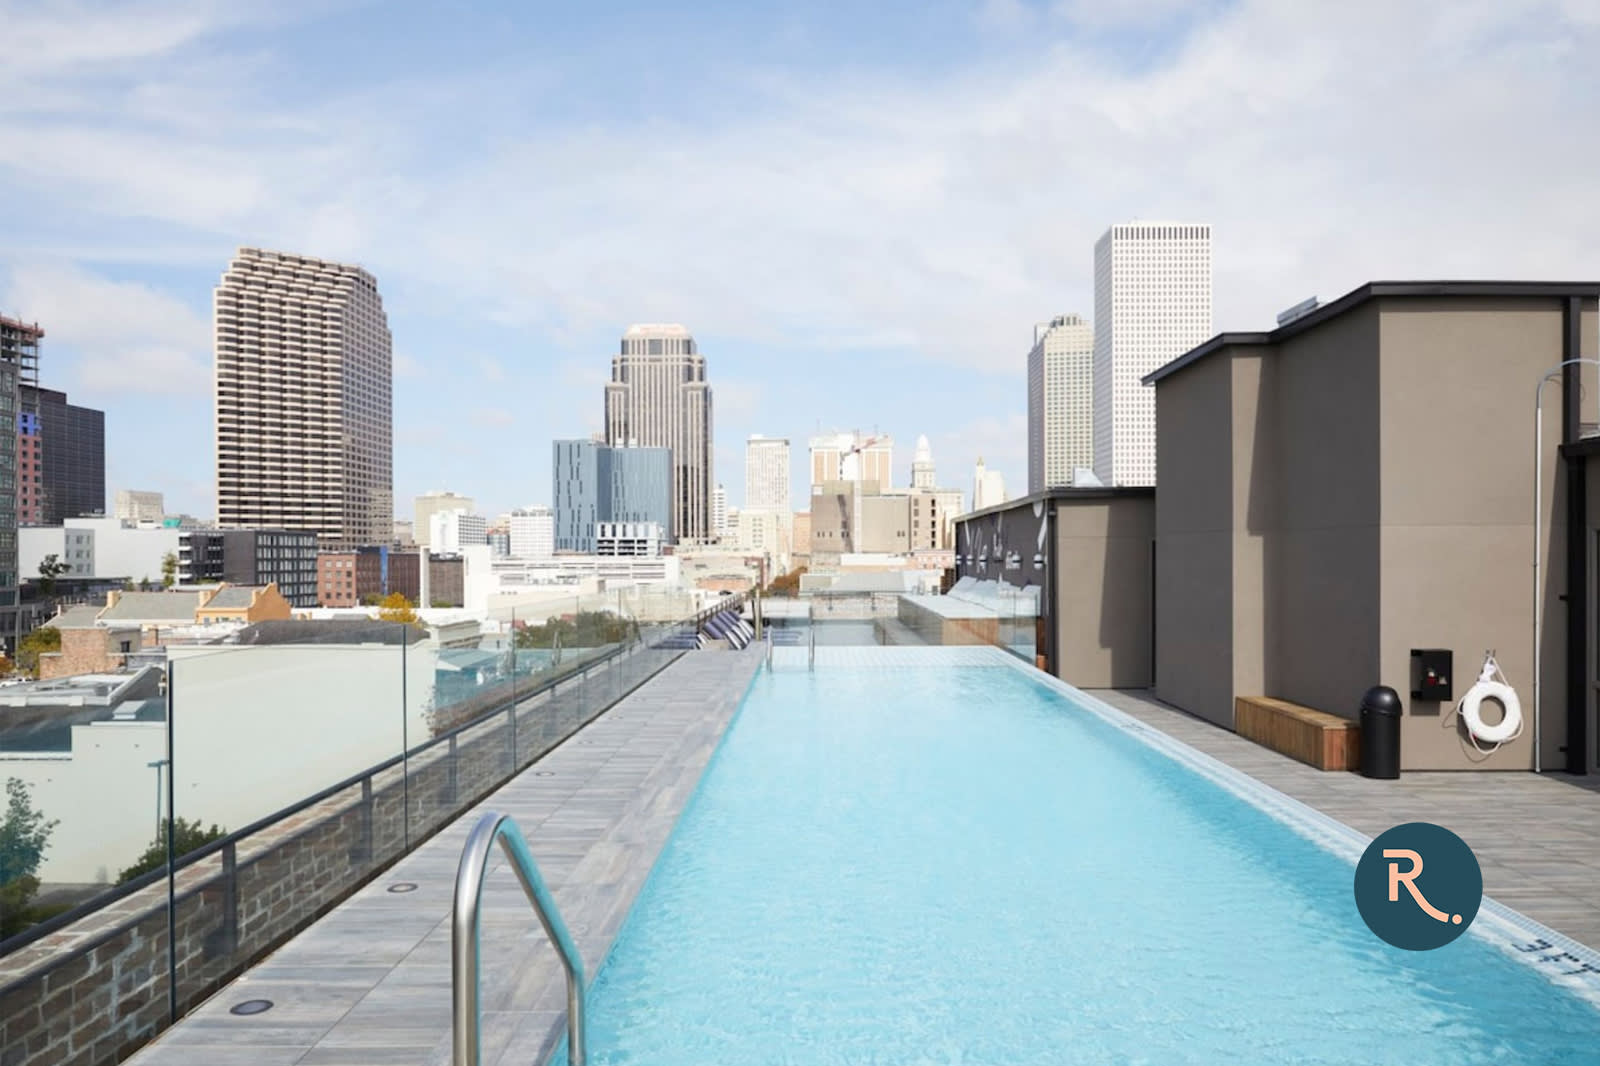 Property Image 1 - The Brandywine | Rooftop Pool | 5 min drive to Bourbon St | 4 Bed 4 Bath